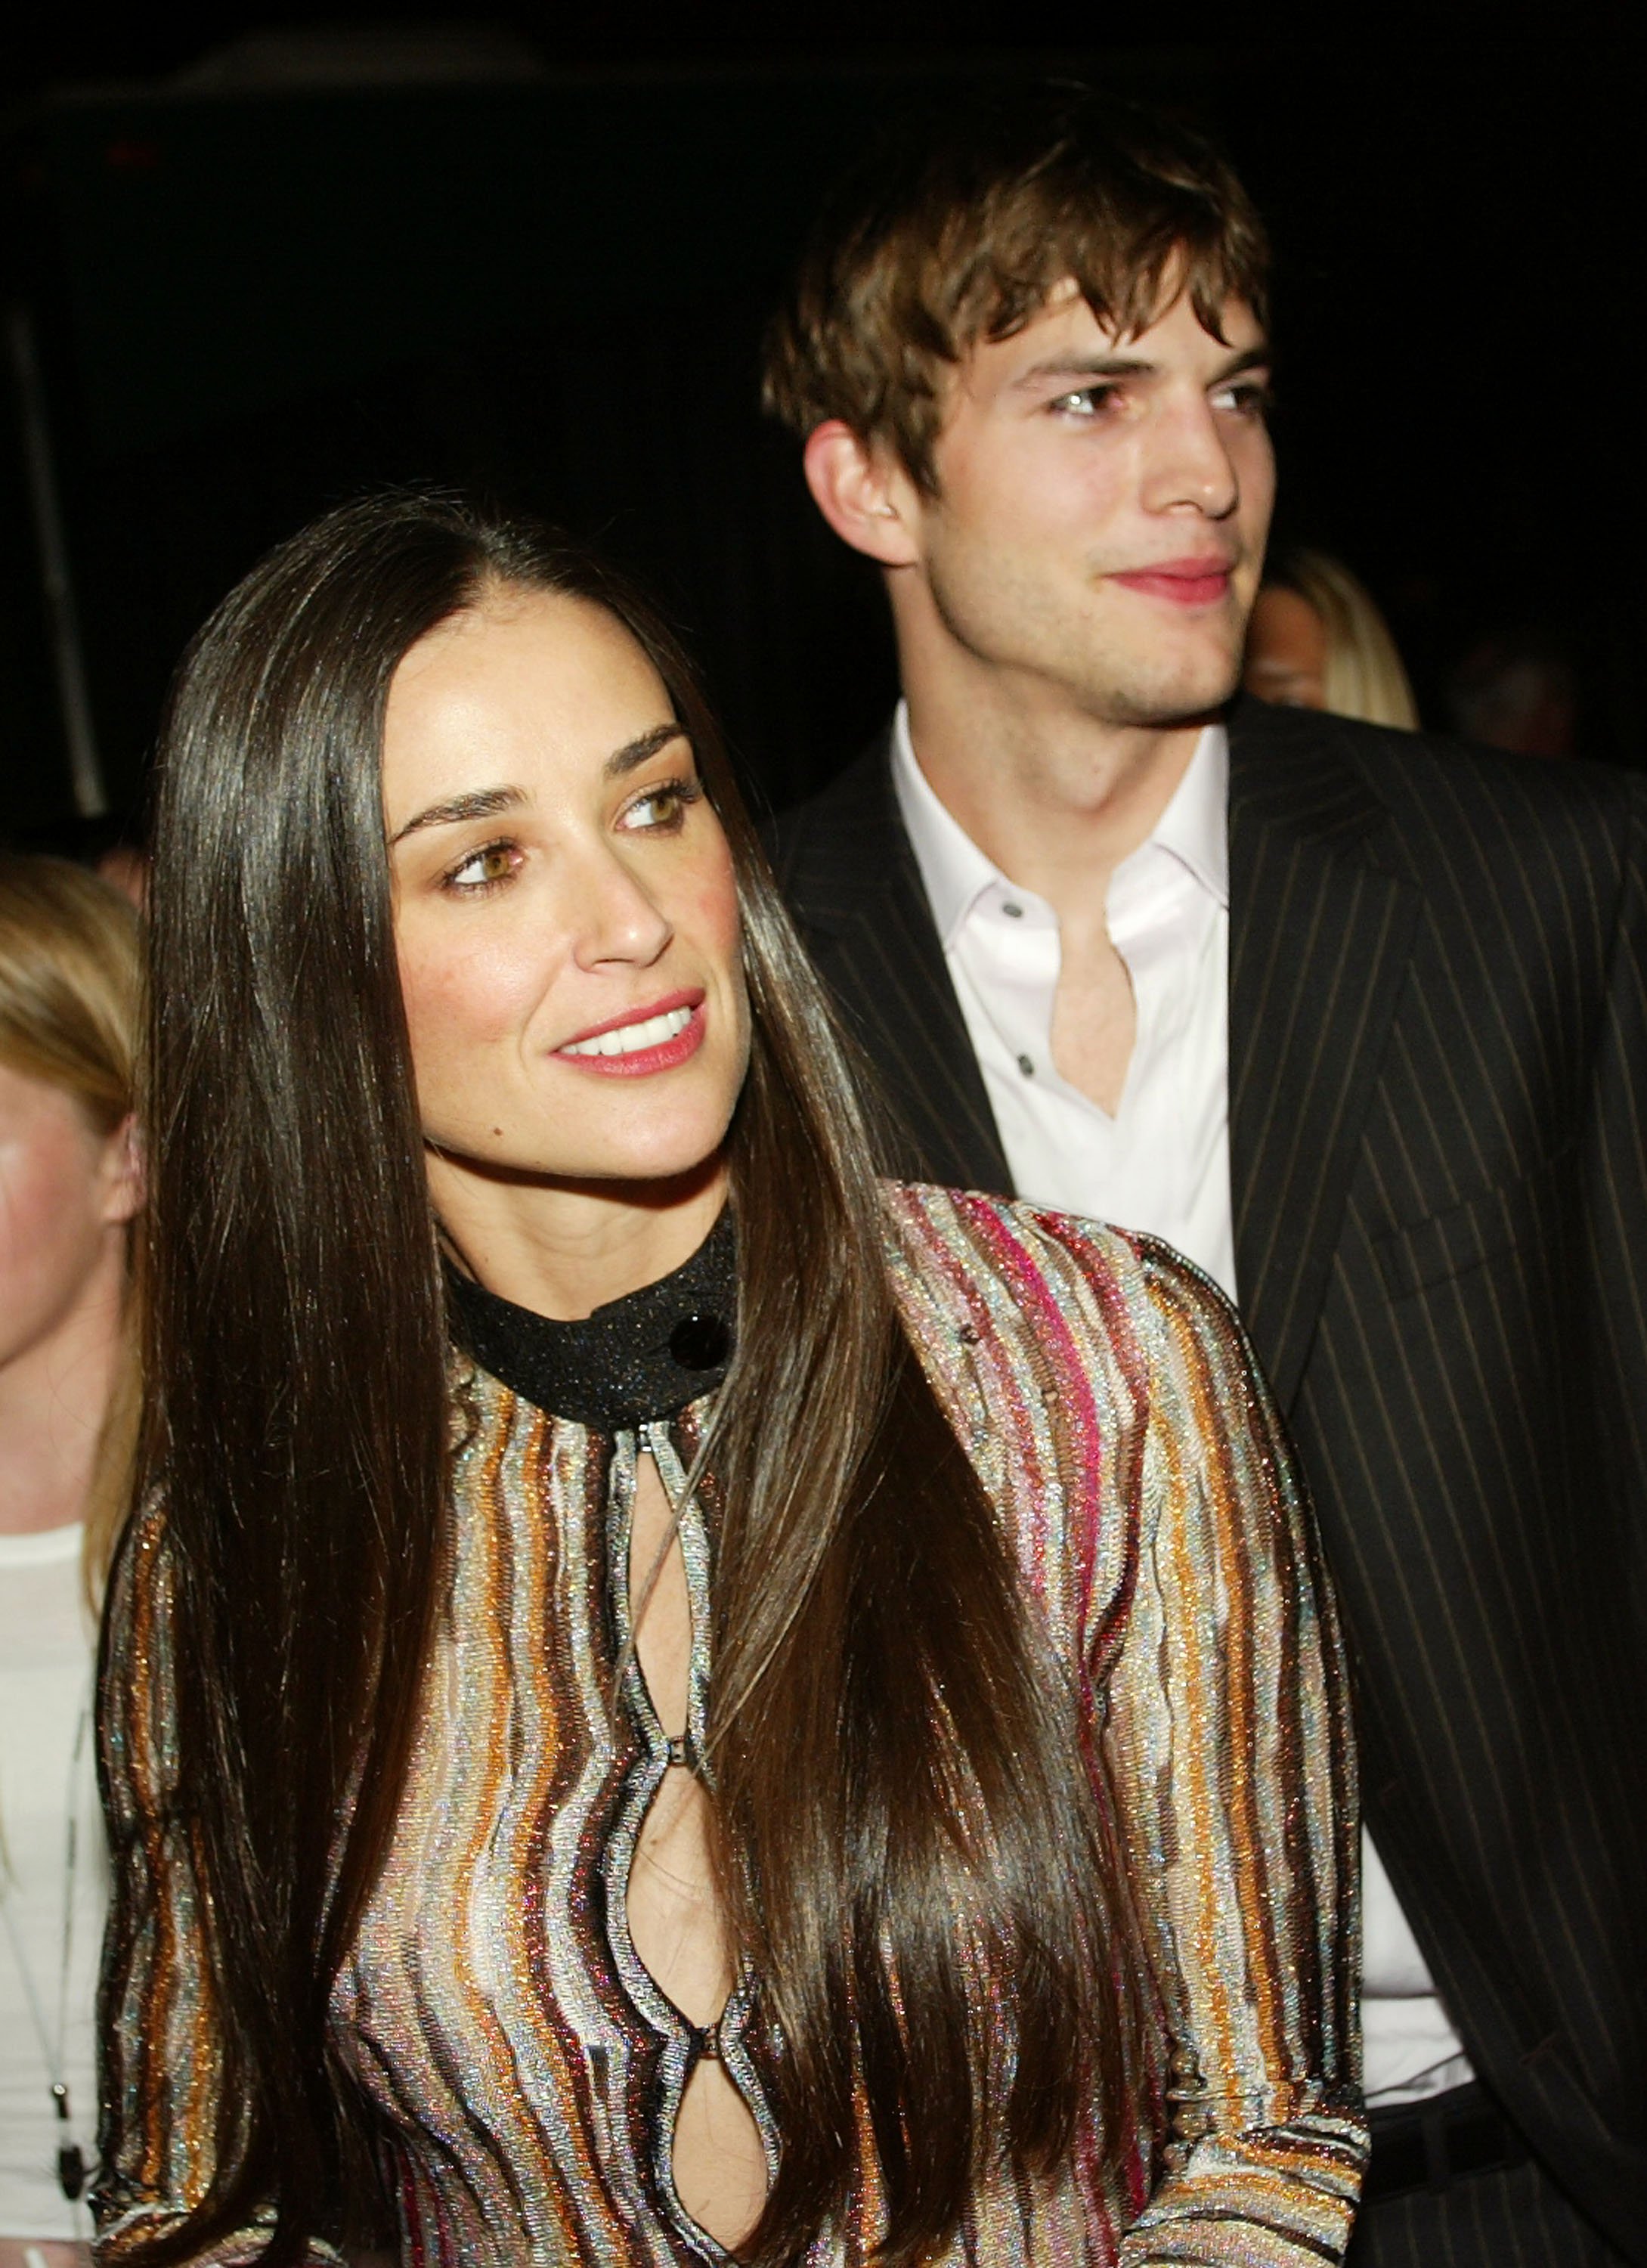 Demi Moore and Ashton Kutcher arrive at the after-party for "Charlie's Angels: Full Throttle" at the Chinese Theater